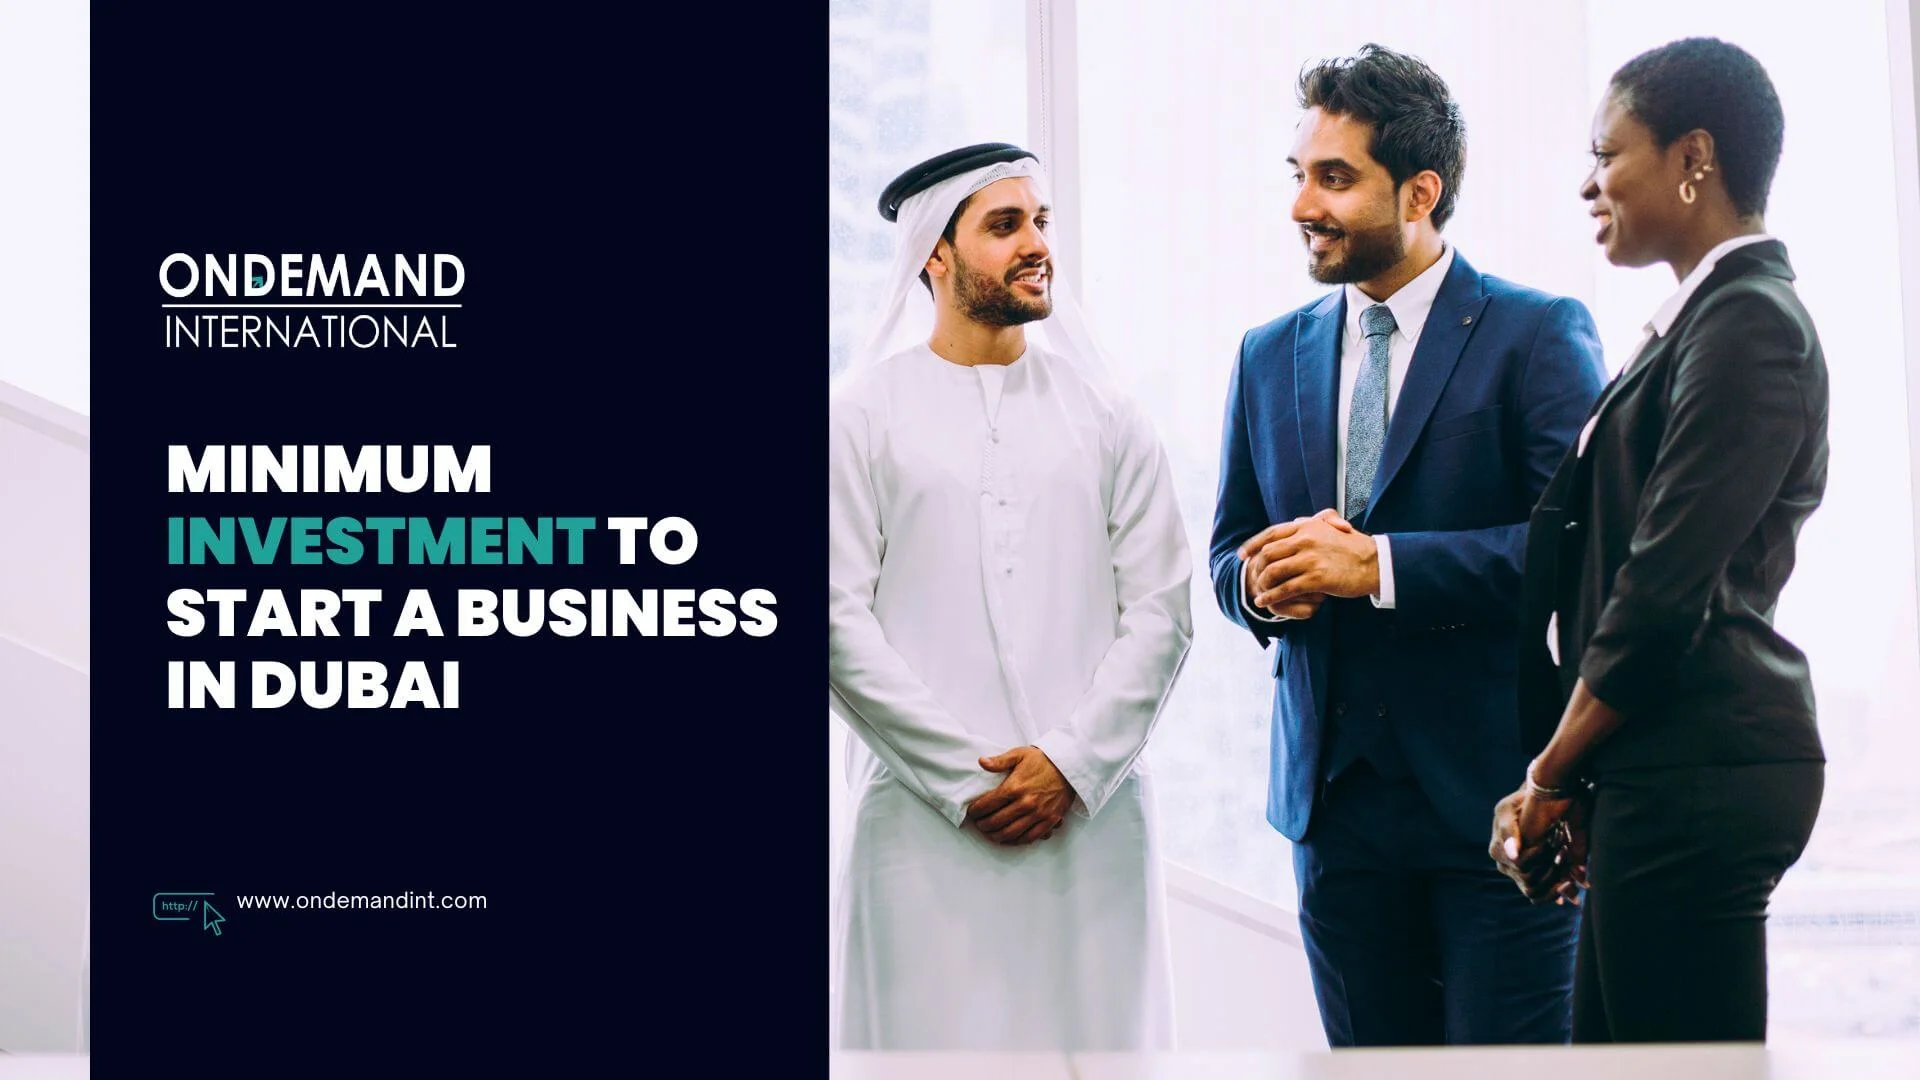 What is the Minimum Investment to Start a Business in Dubai?